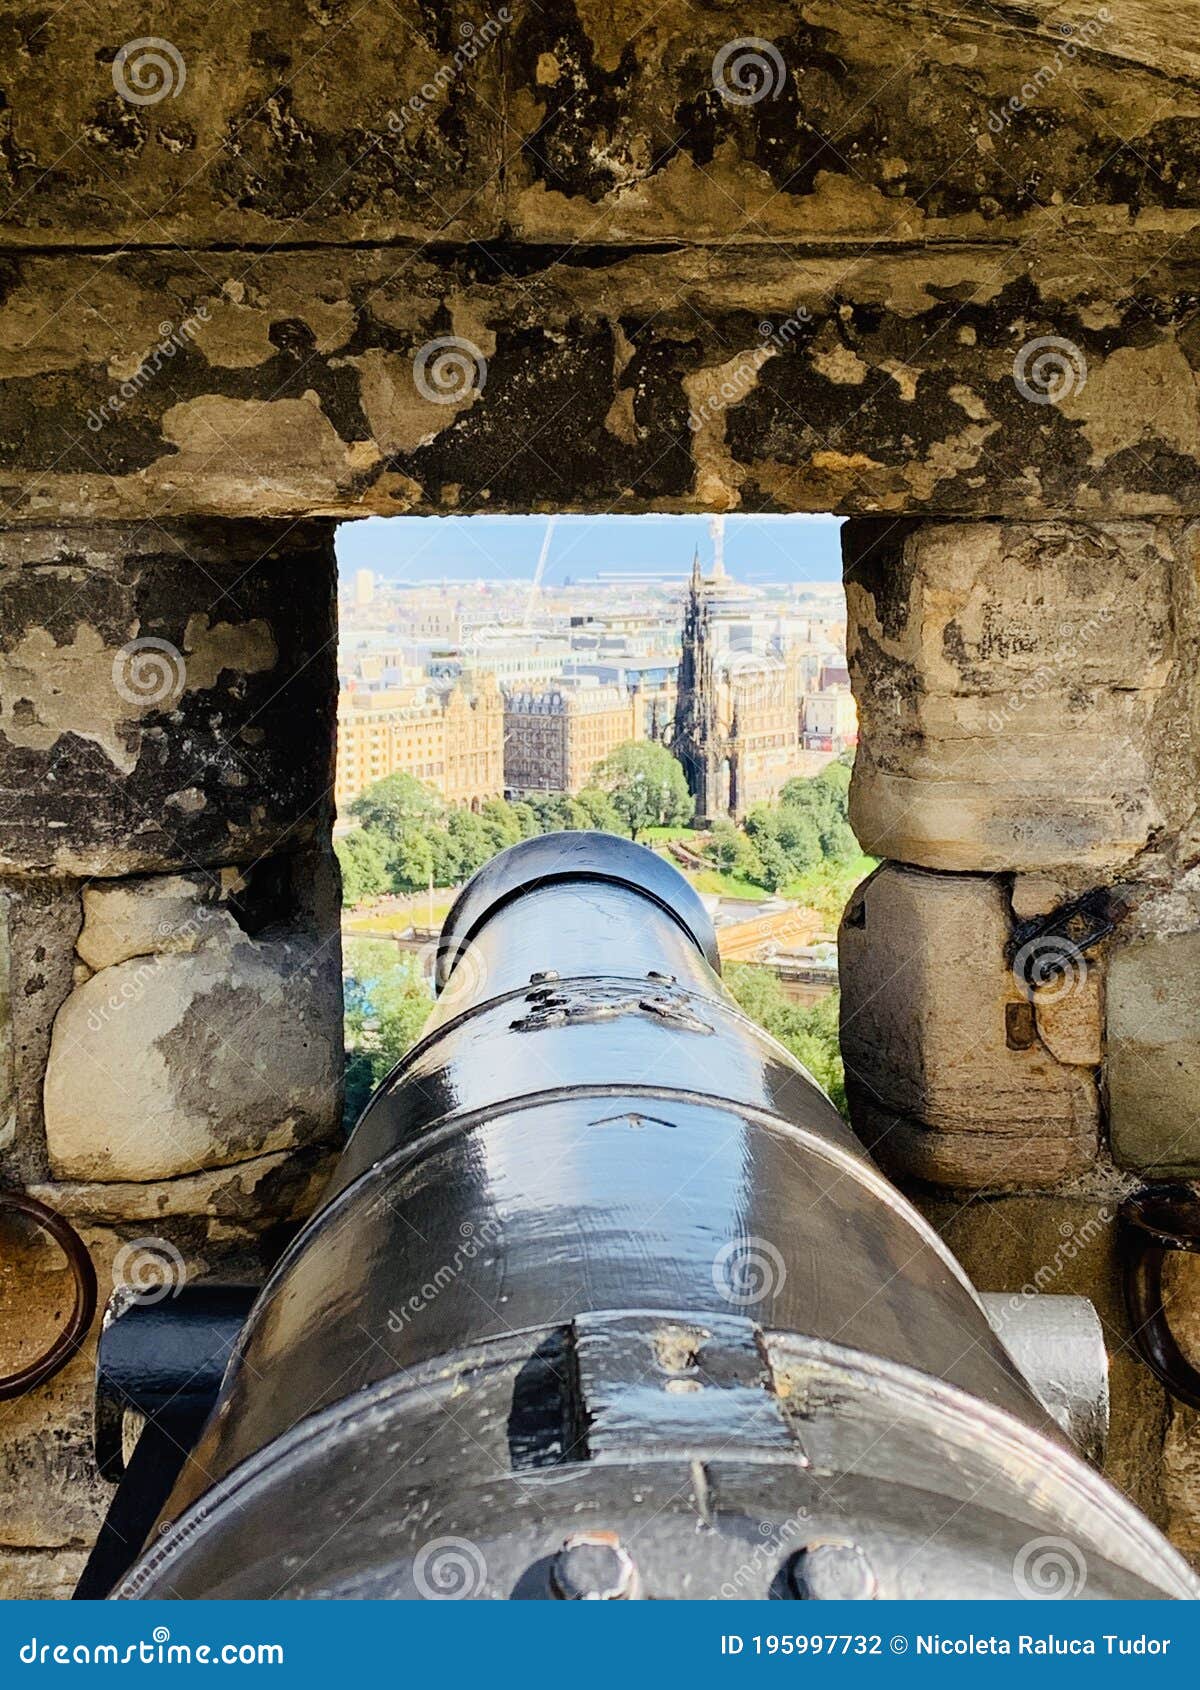 cannons of the edinburgh castle a historic fortress which dominates the skyline of the capital city of scotland, from its position